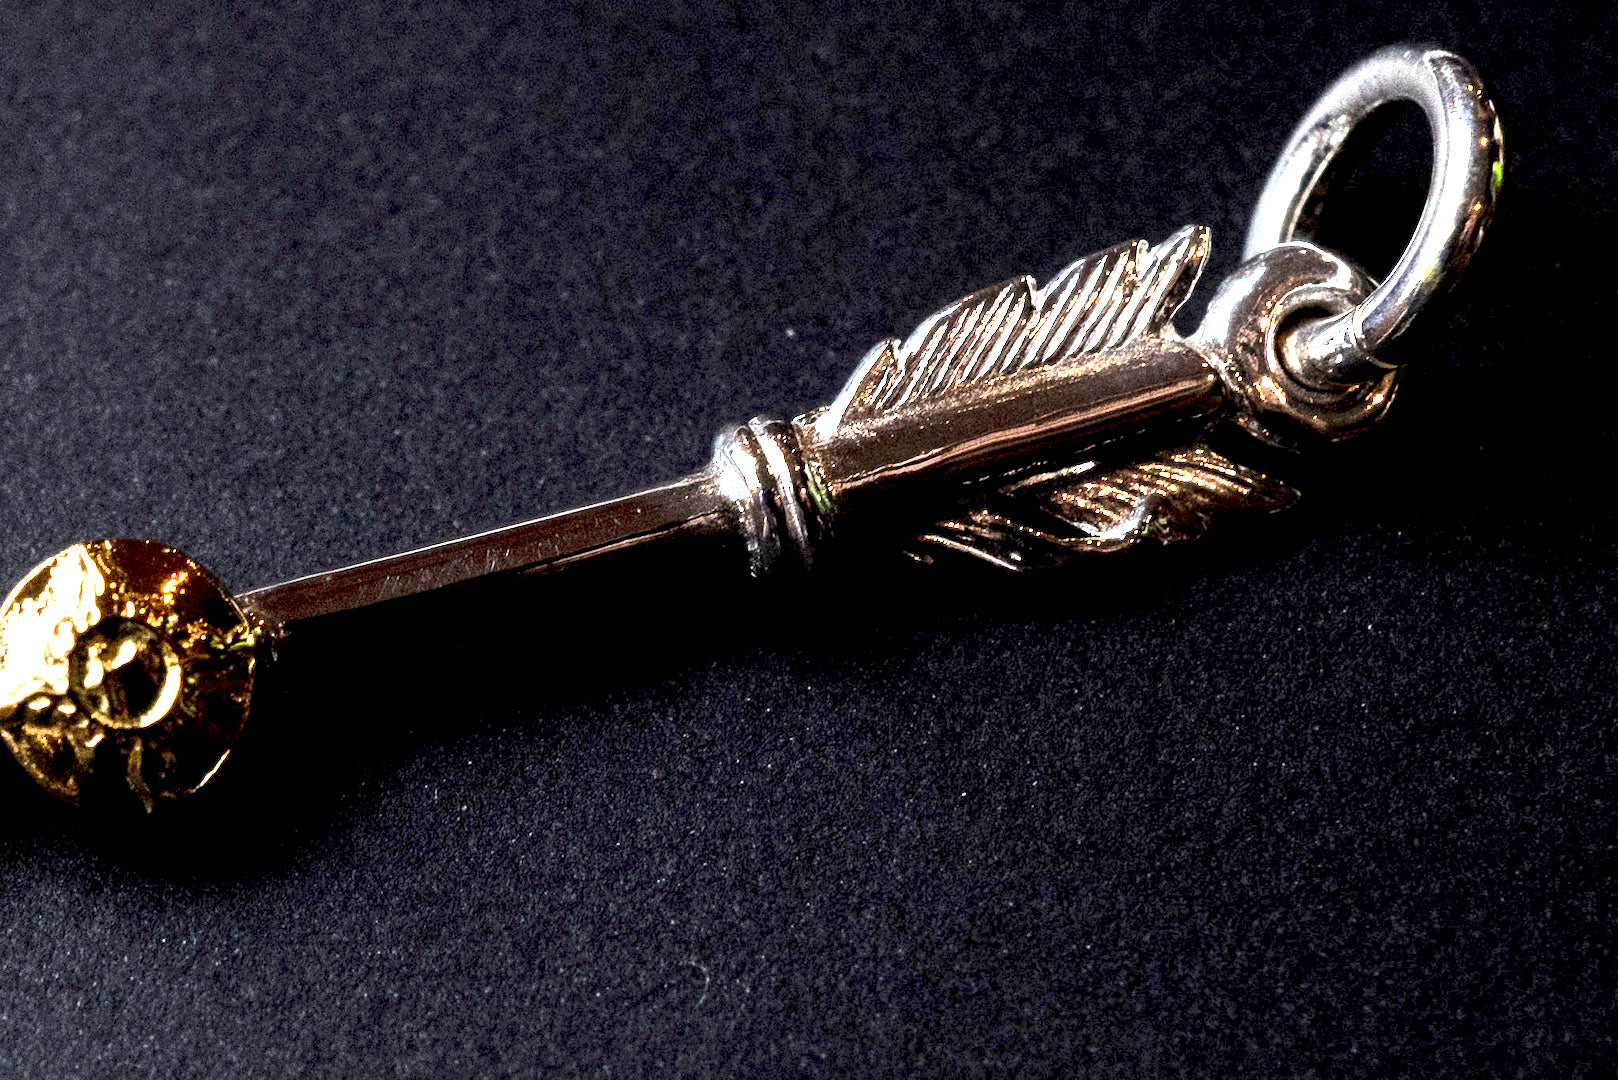 First Arrow's Size Large "Arrow" Silver Pendant with K18 Gold Emblem (P-187)